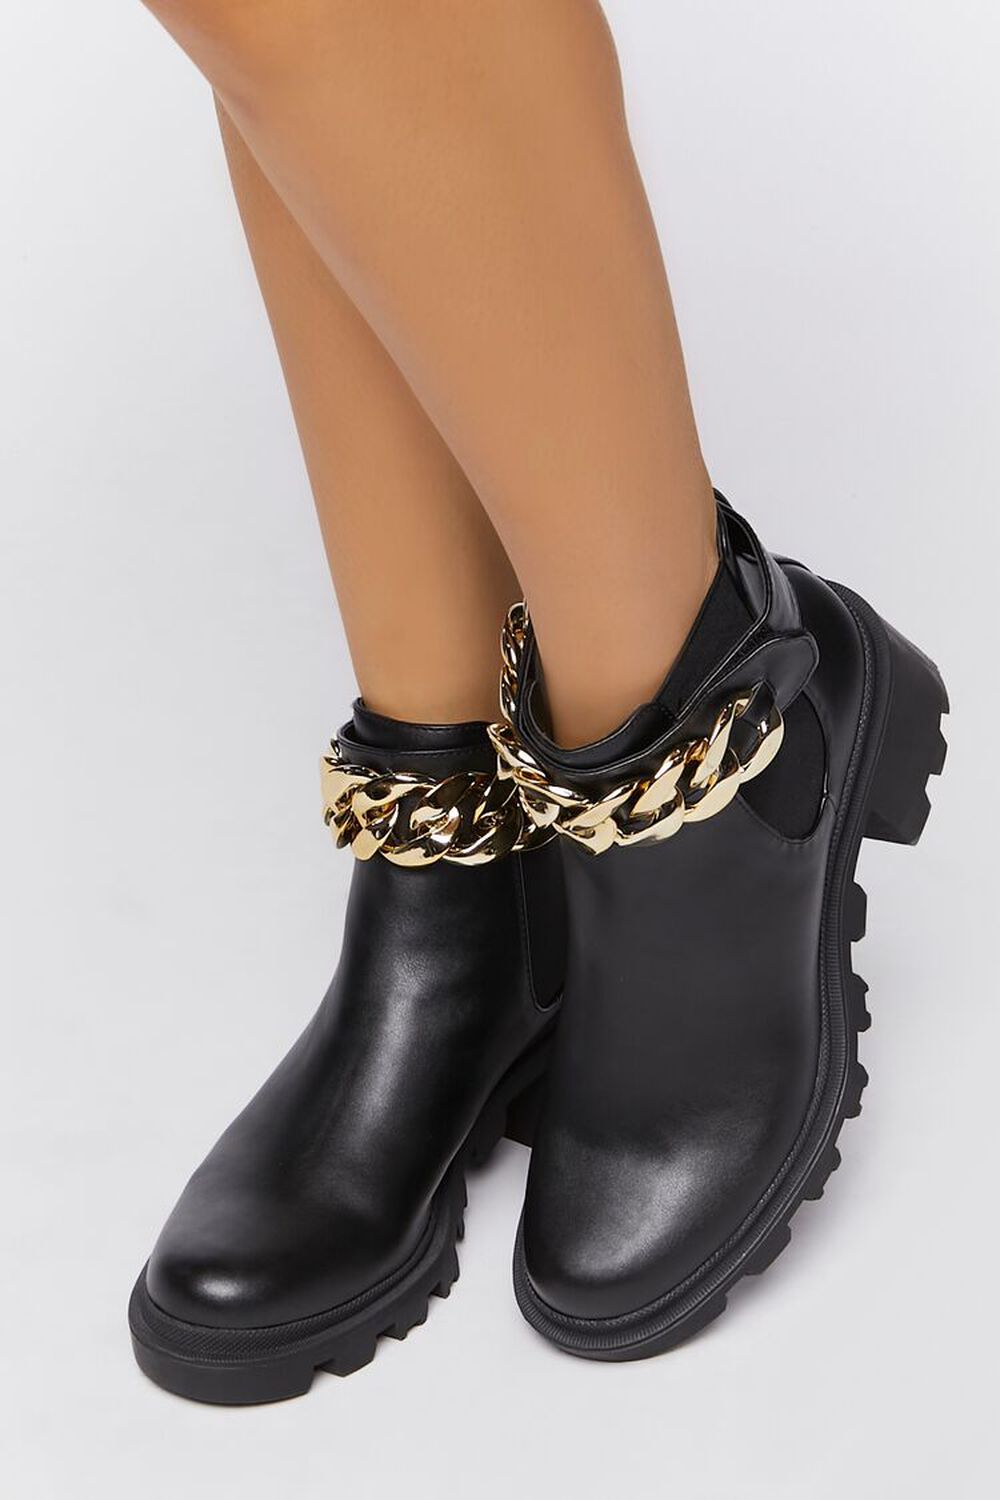 BLACK Curb Chain Chelsea Boots, image 1